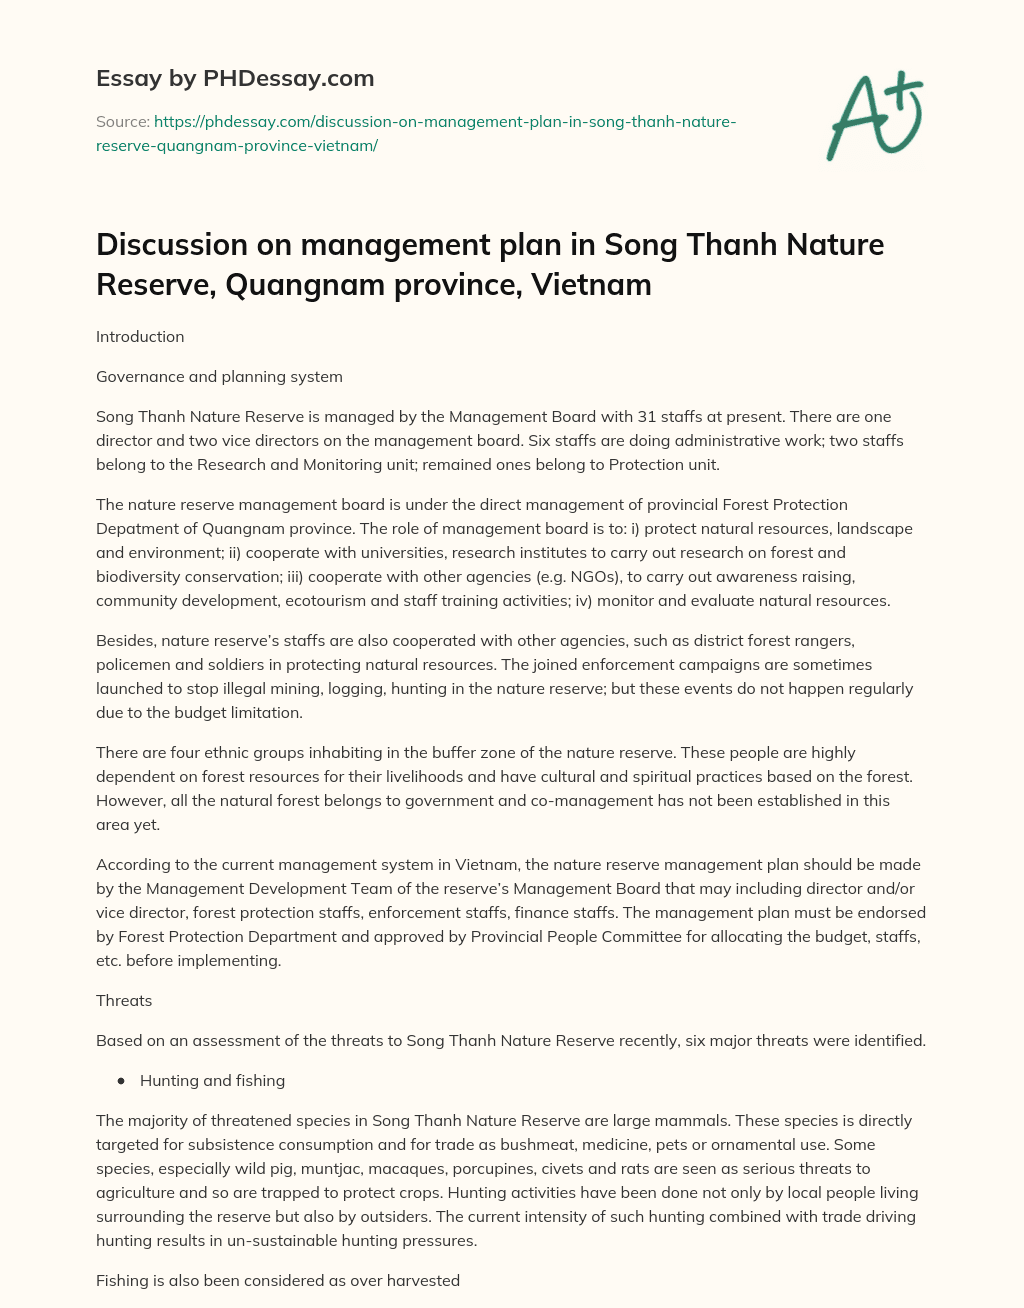 Discussion on management plan in Song Thanh Nature Reserve, Quangnam province, Vietnam essay